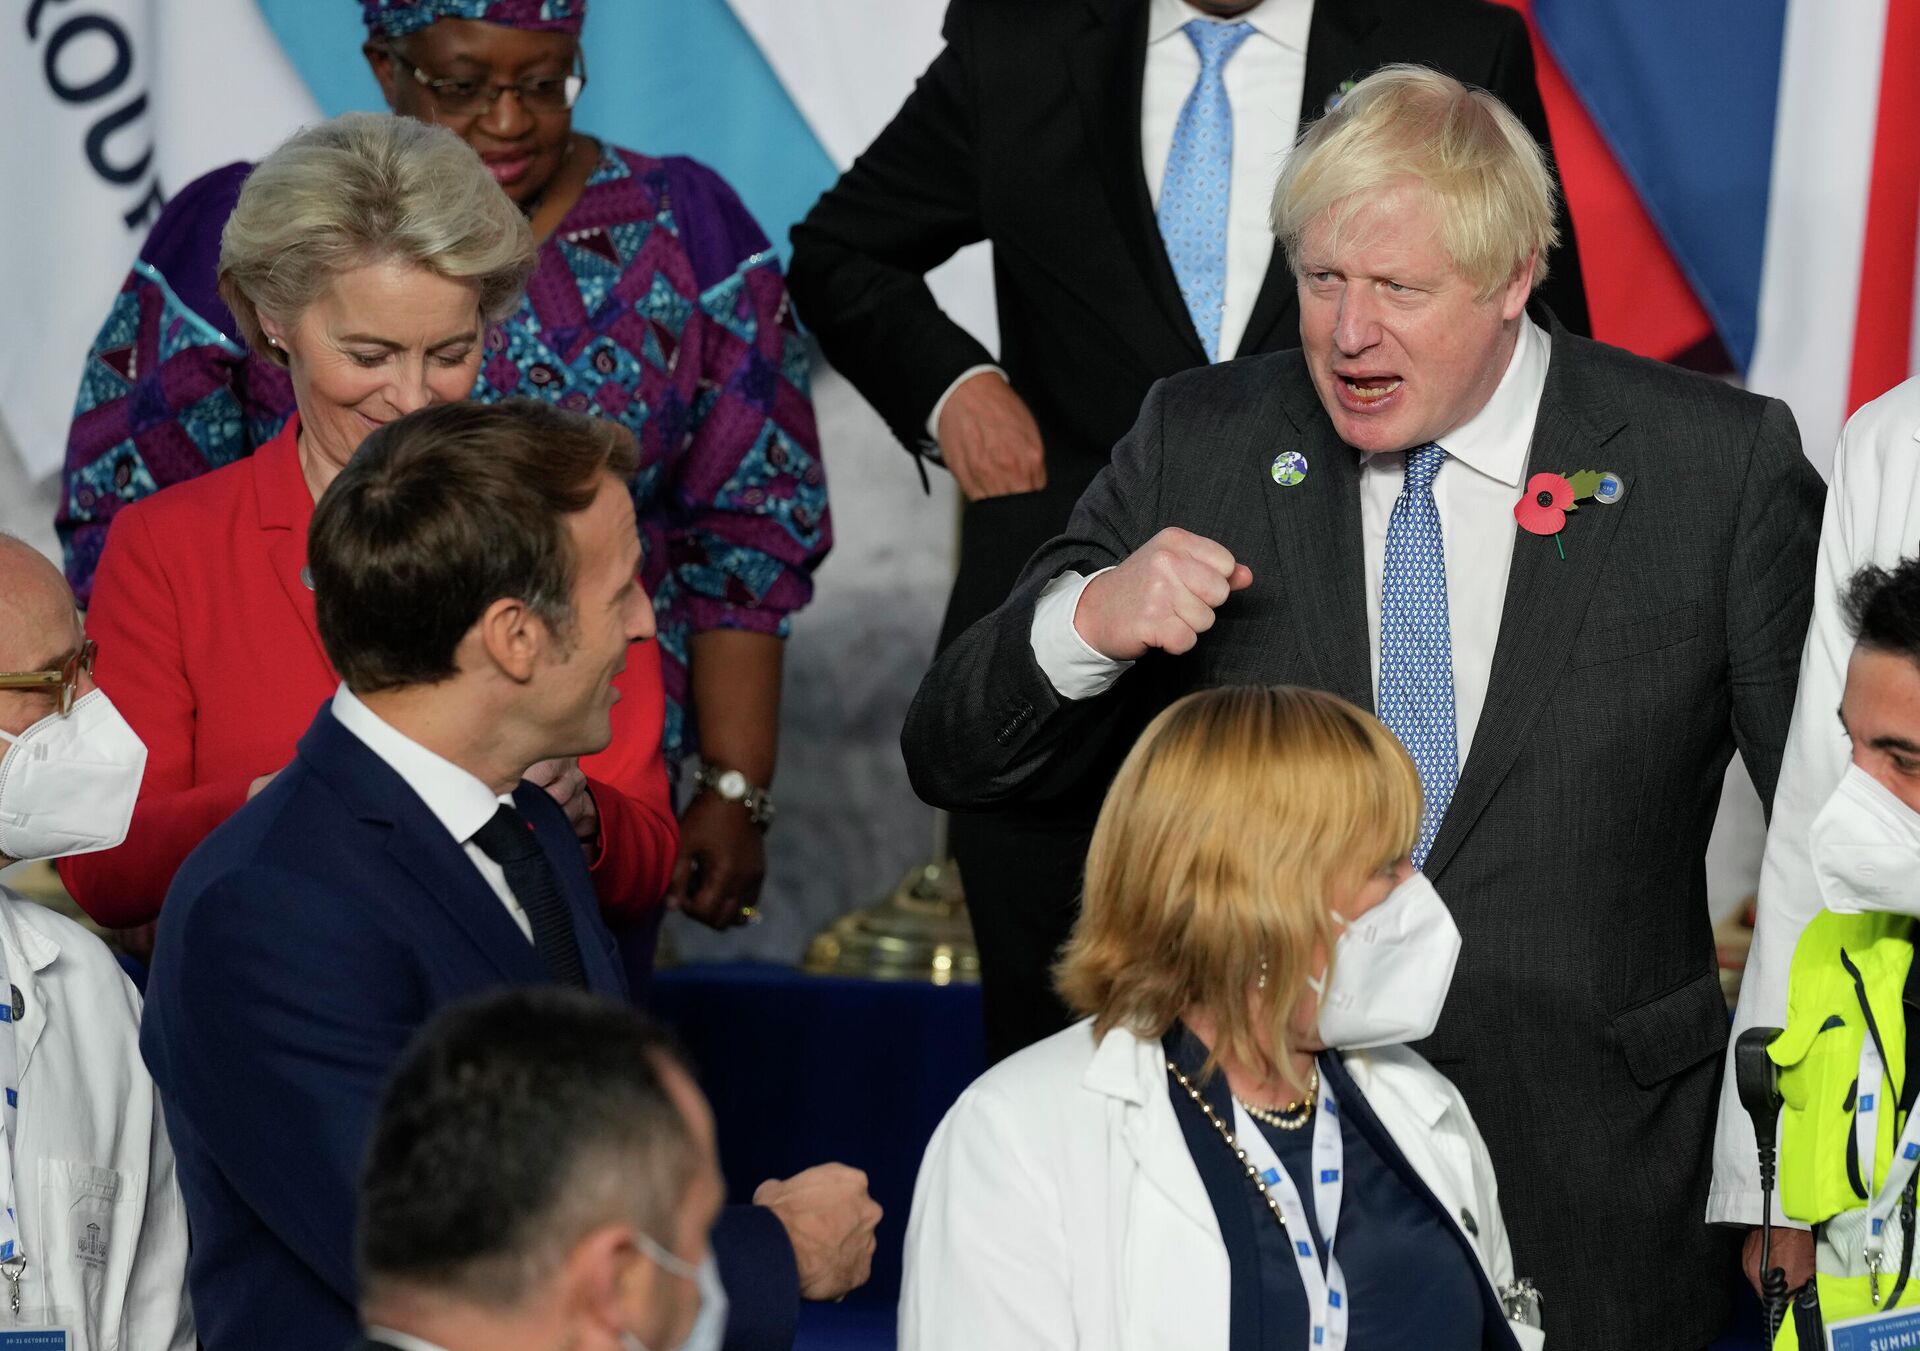 British Prime Minister Boris Johnson, center, pumps fists with French President Emmanuel Macron, left, during a group photo with medical personnel at the La Nuvola conference center for the G20 summit in Rome, Saturday, Oct. 30, 2021. - Sputnik International, 1920, 30.10.2021